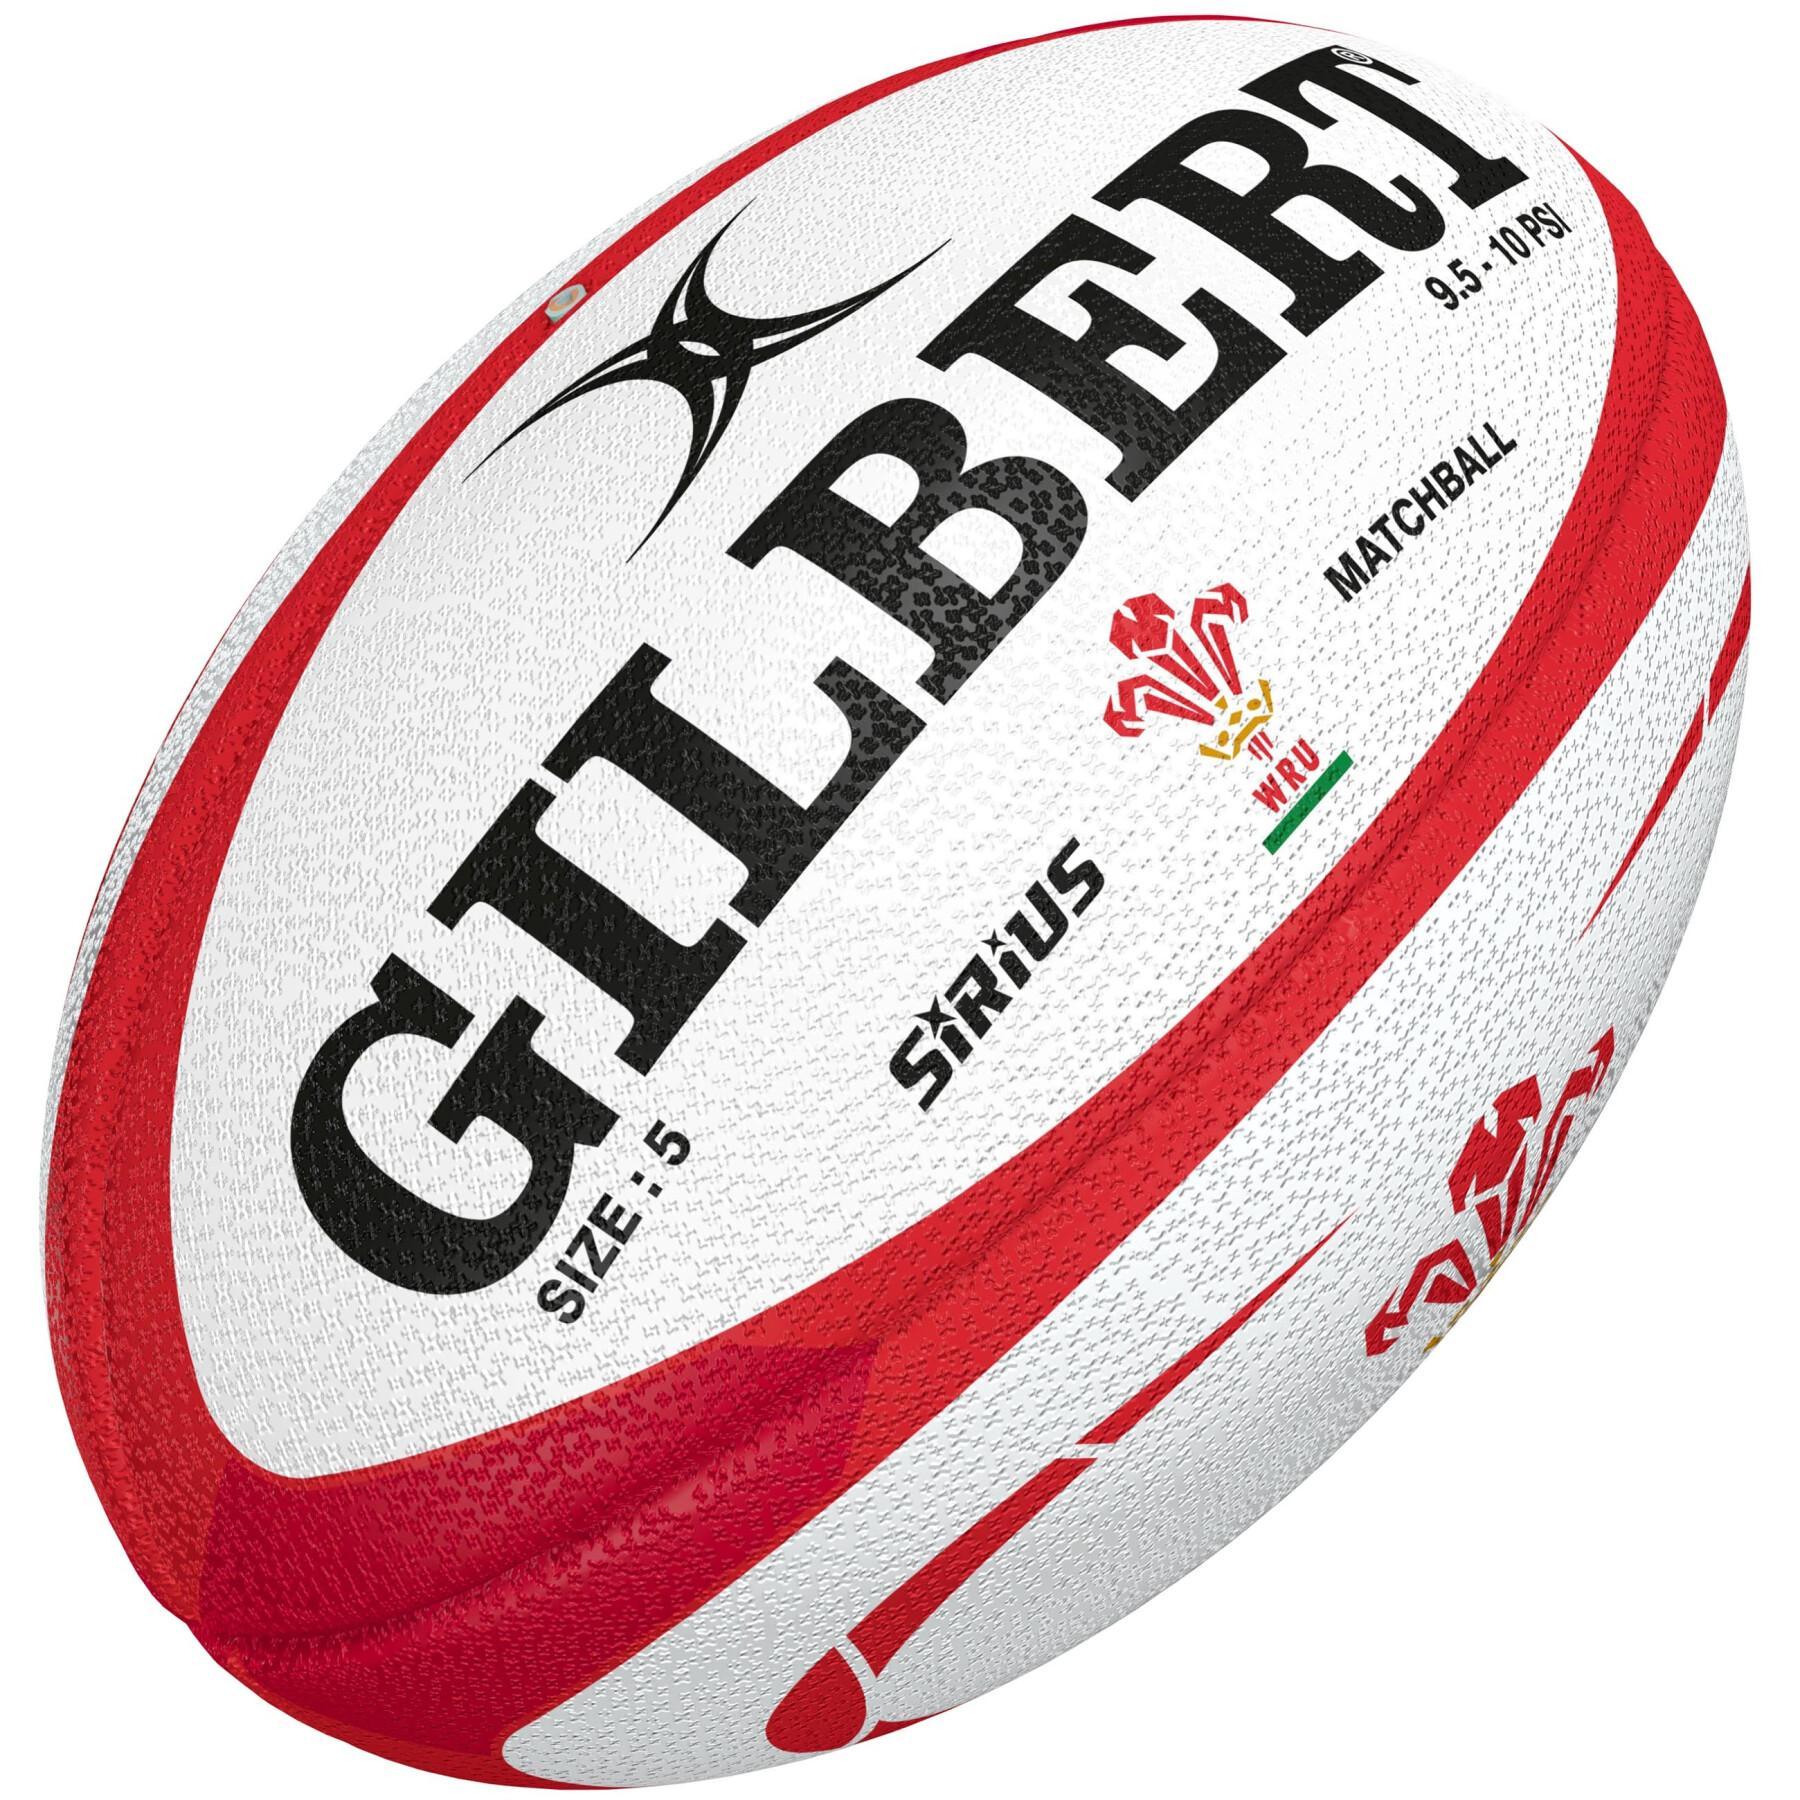 Rugbyball Pays de Galles 2021/22